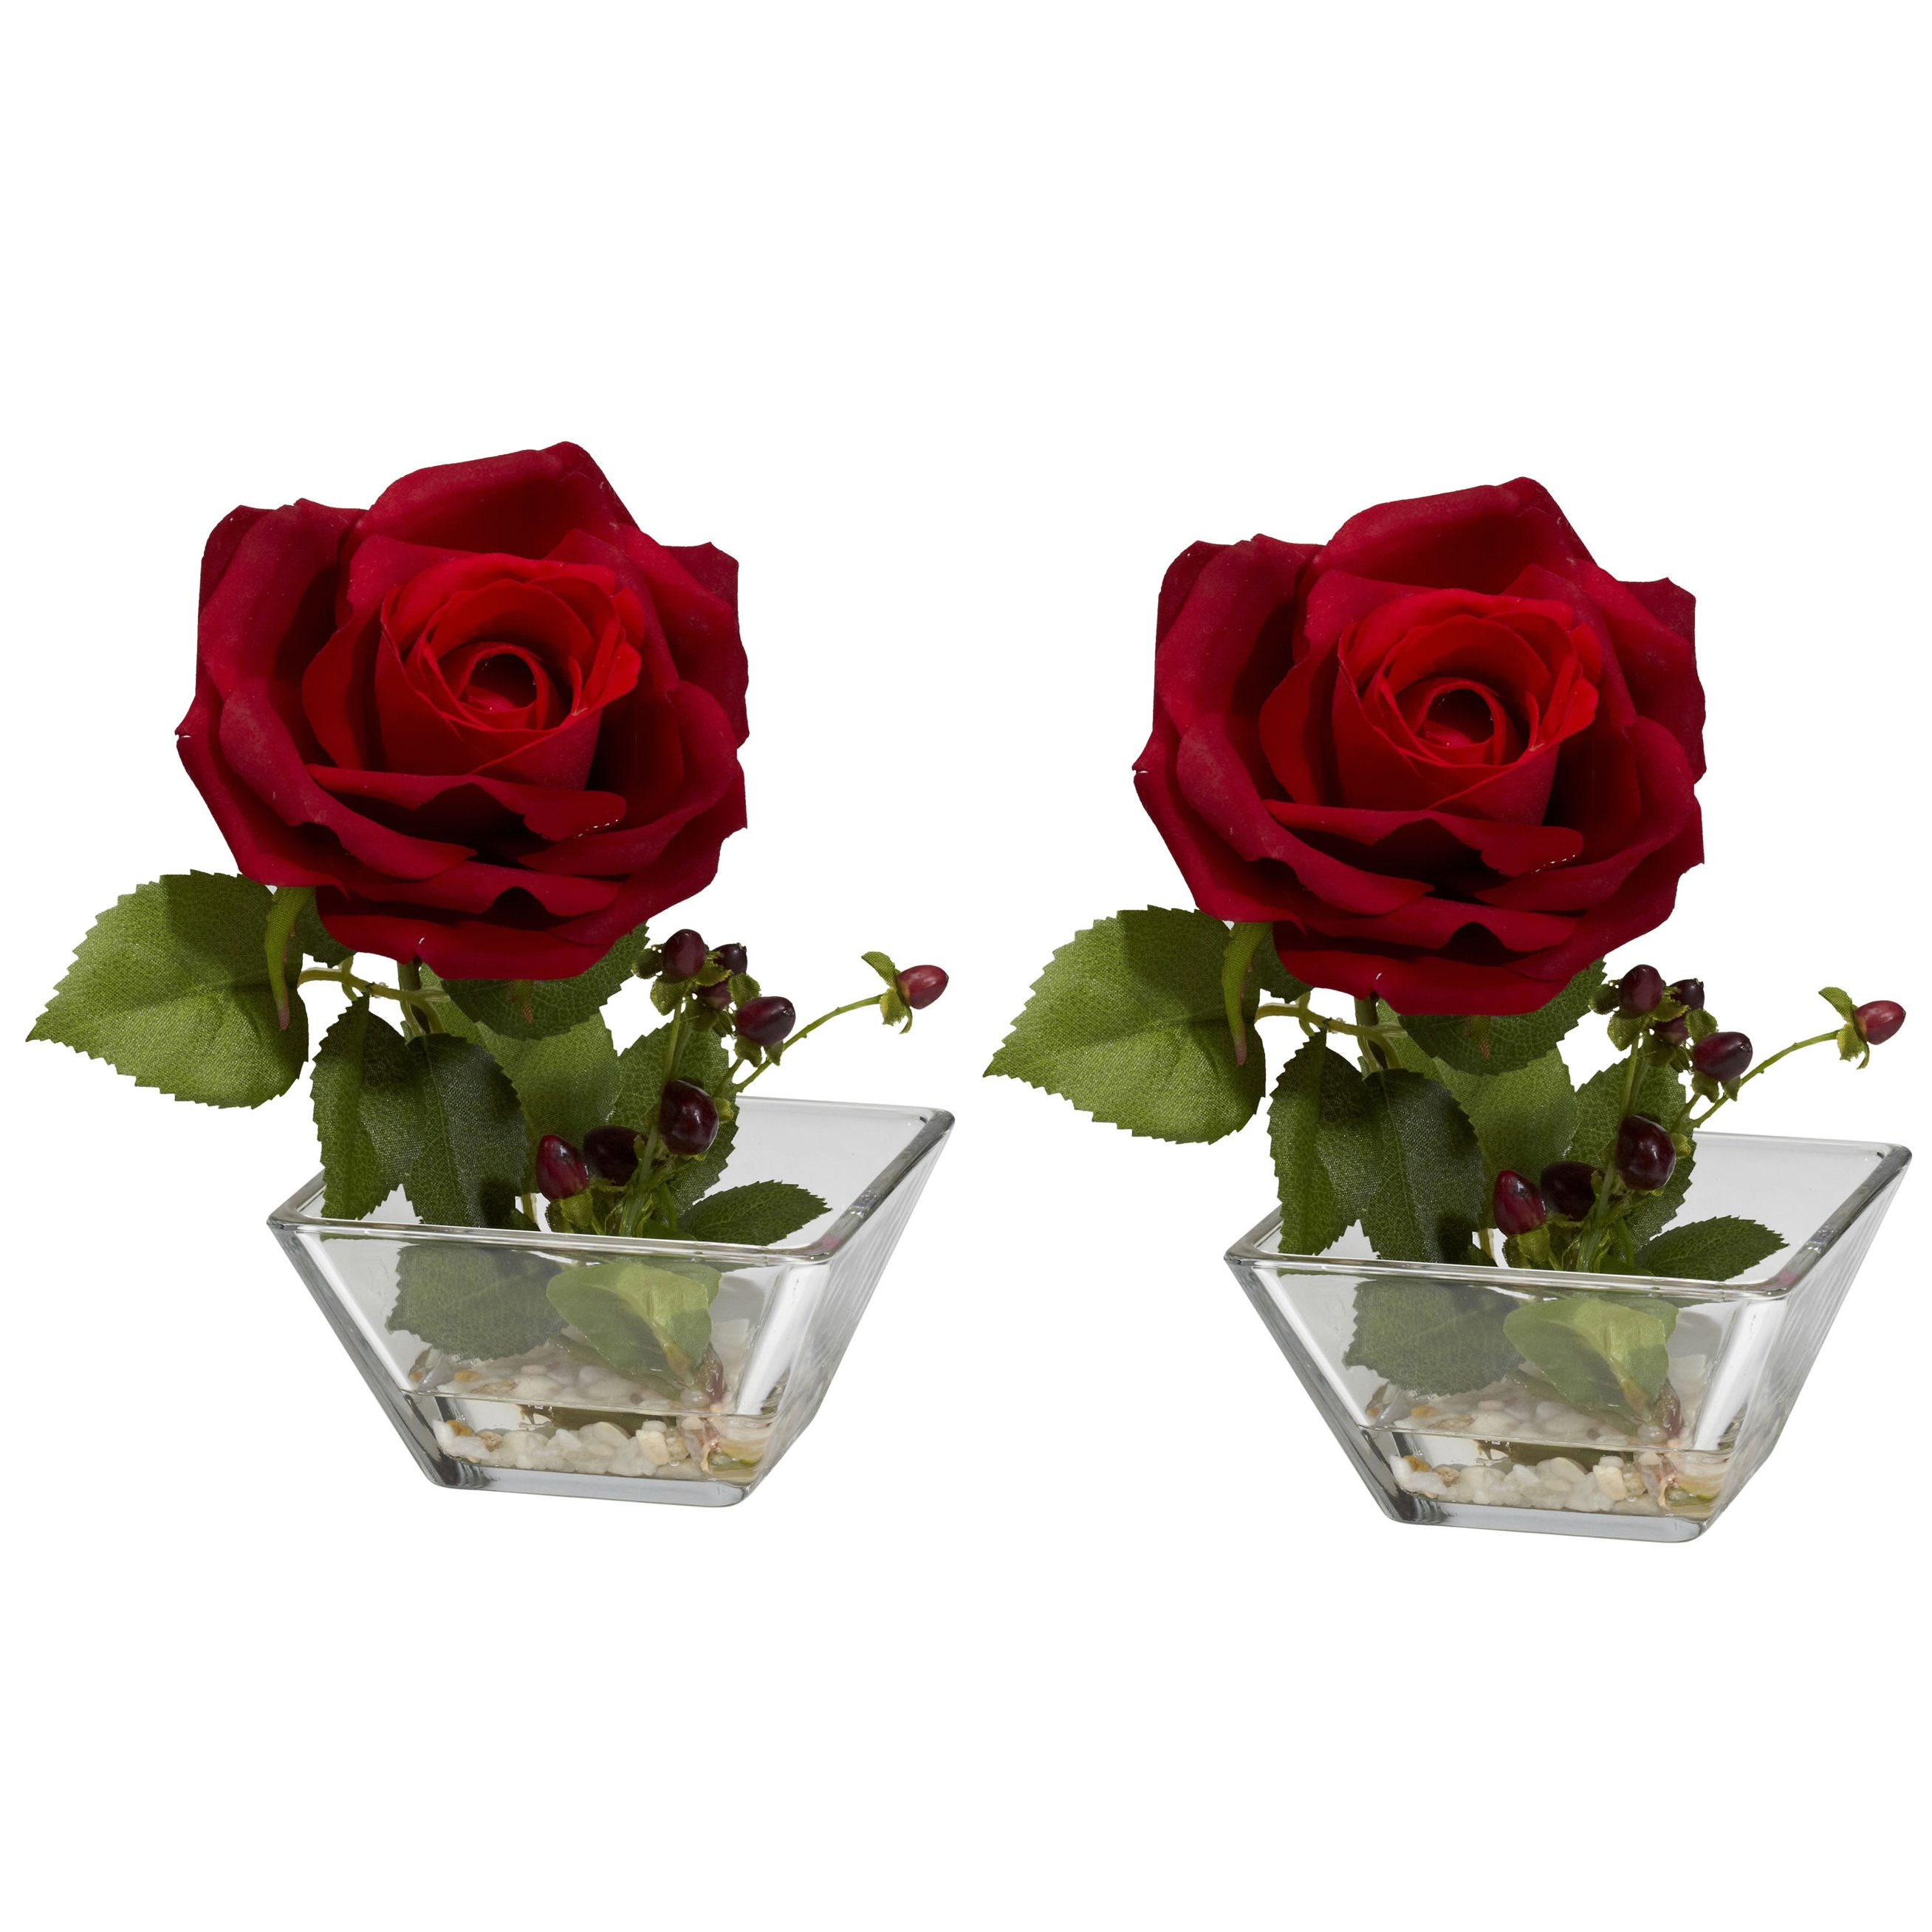 27 Recommended Large Square Glass Vase 2024 free download large square glass vase of vases design ideas square glass vases wholesale flowers and with square flower vases rose vase silk arrangement set of two free overstock plus one big red